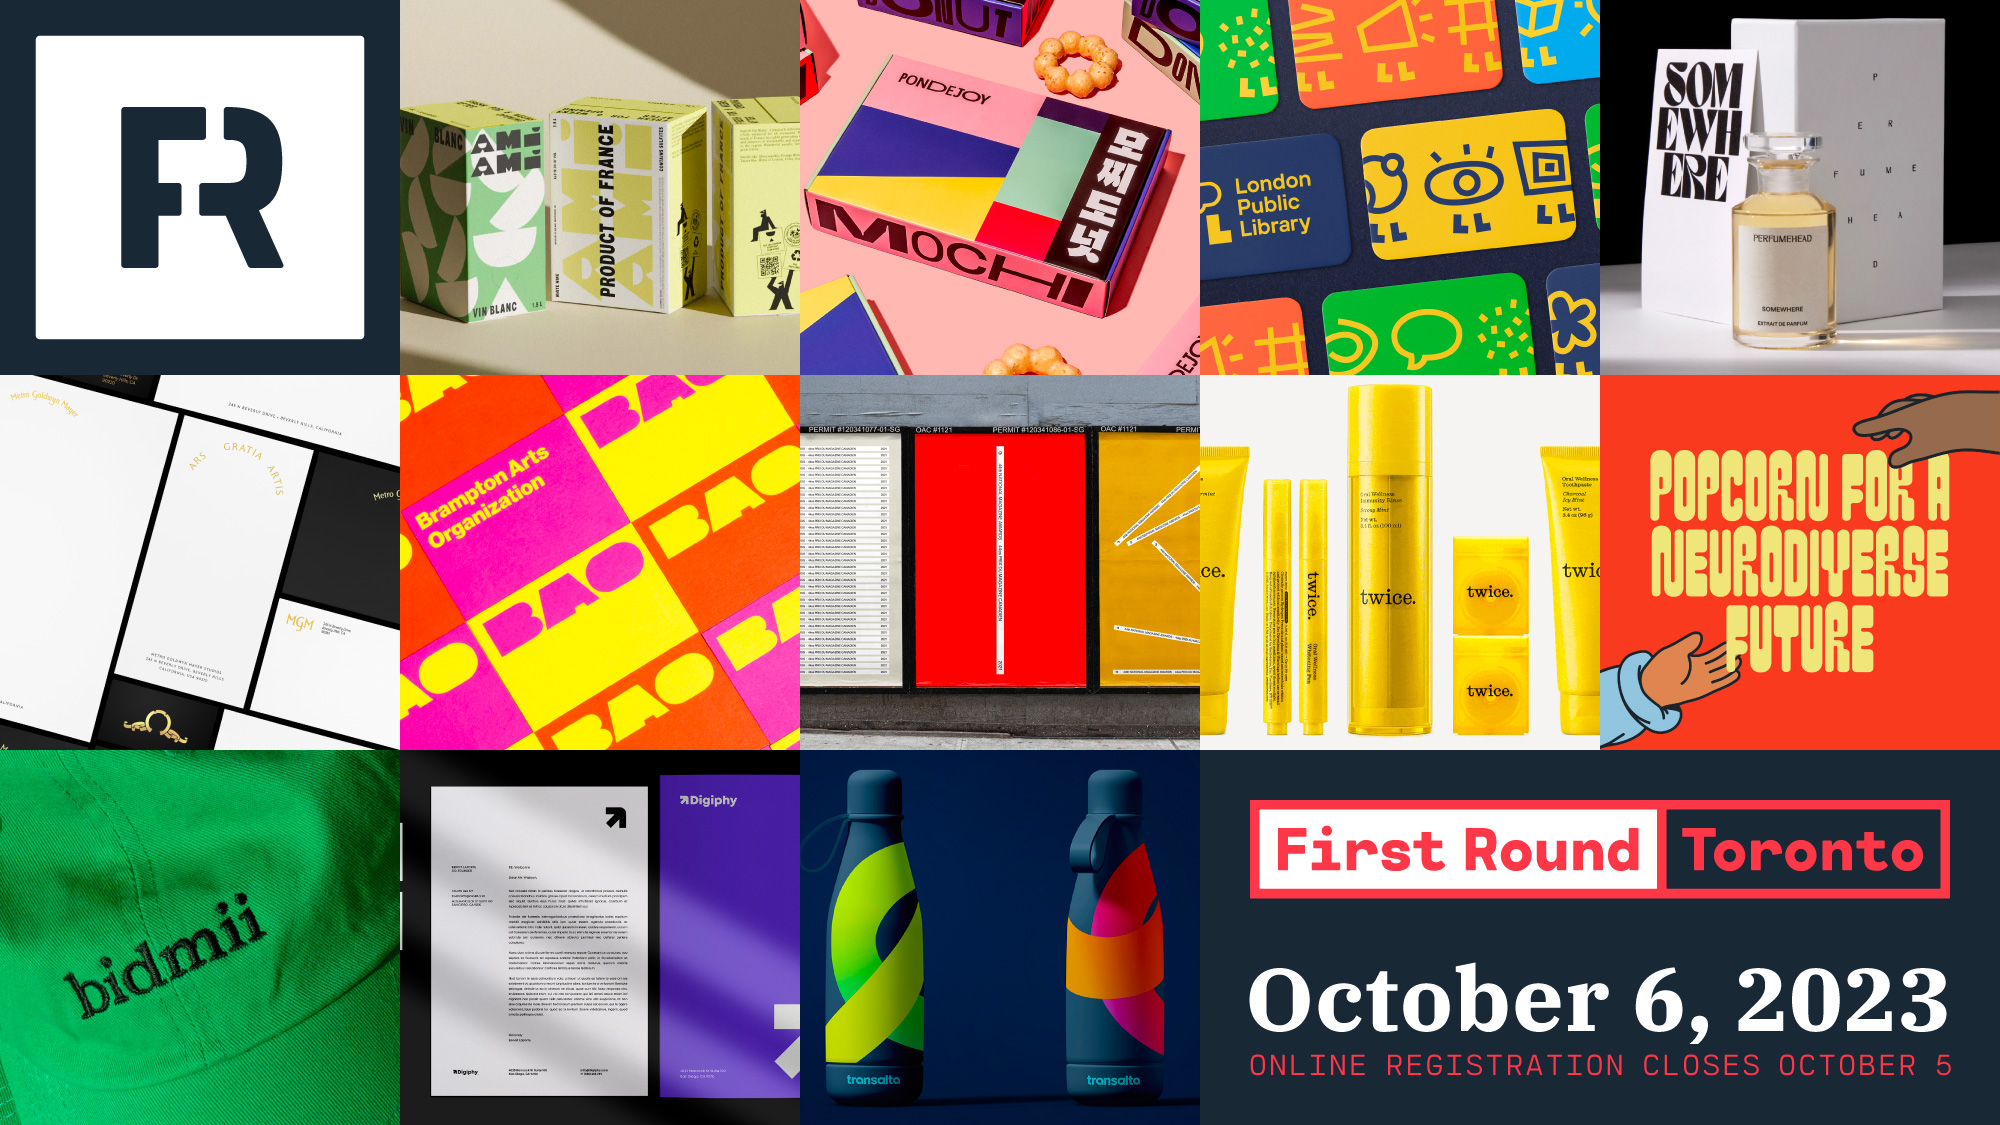 First Round TOR: Registration Closes October 5